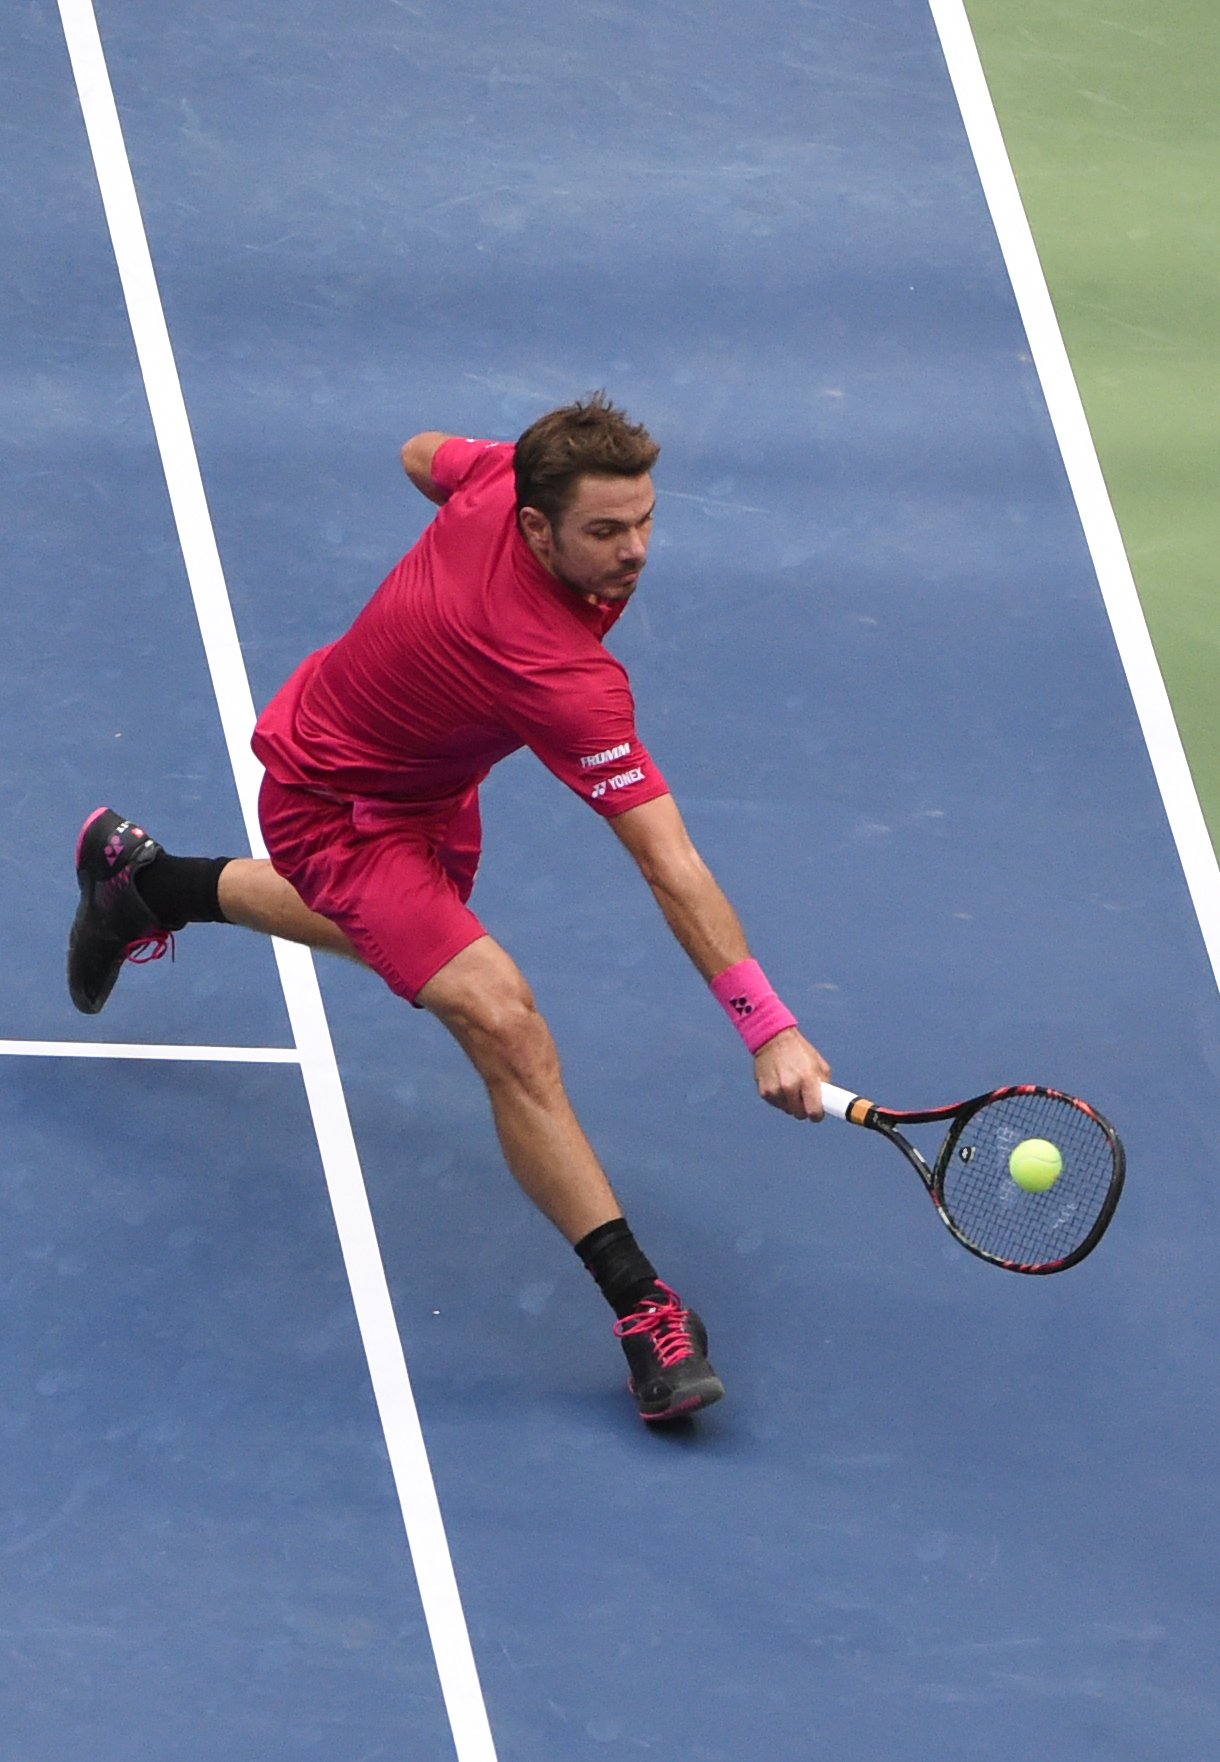 Stan Wawrinka of Switzerland hits a return to Novak Djokovic of Serbia during their 2016 US Open men's final match at the USTA Billie Jean King National Tennis Center in New York on September 11, 2016. / AFP / Timothy A. CLARY (Photo credit should read TIMOTHY A. CLARY/AFP/Getty Images)